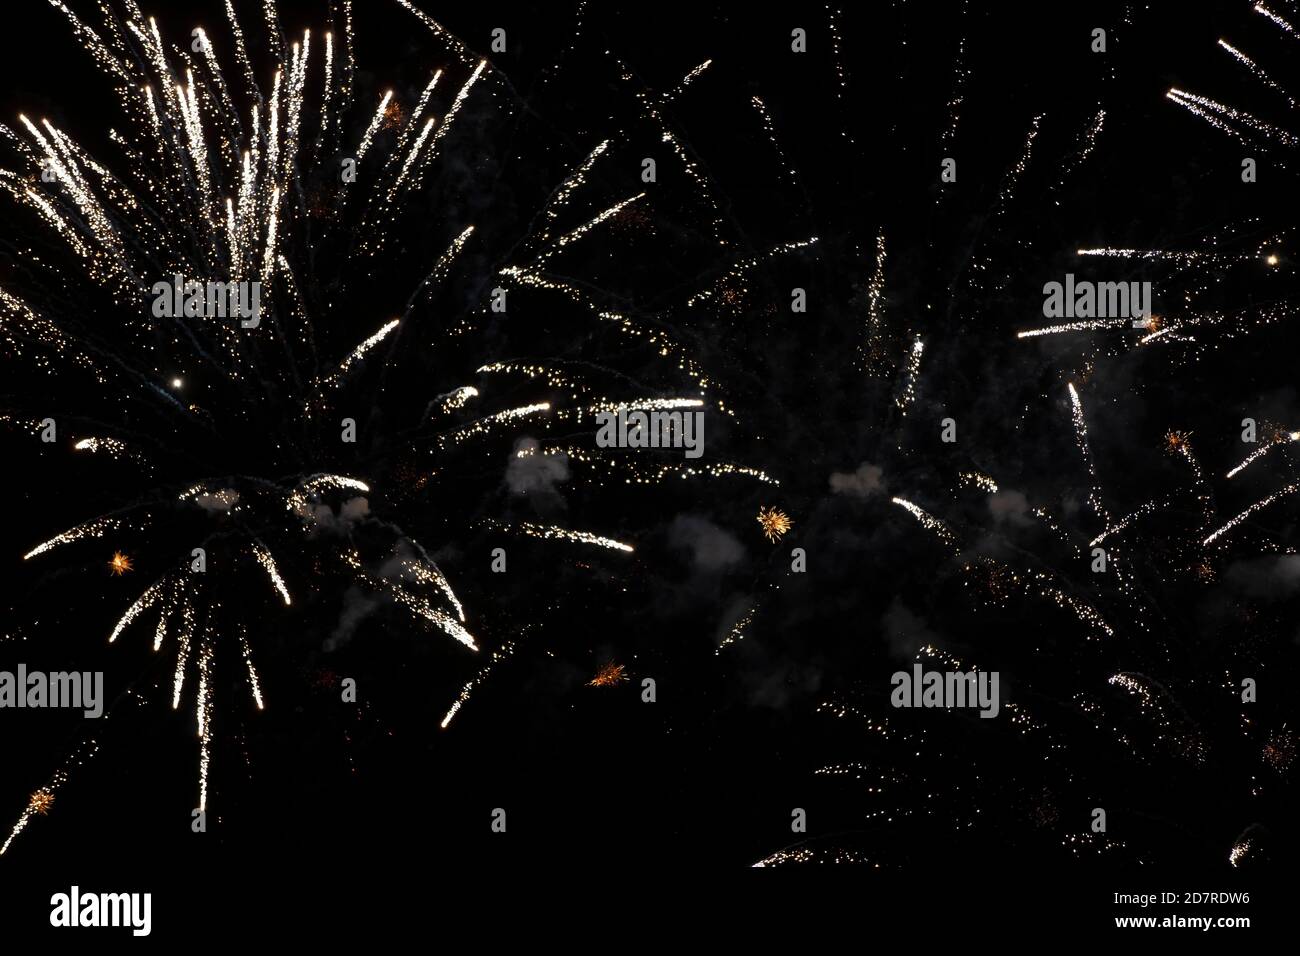 On a black background, rays and sparks of scattering fireworks. Stock Photo